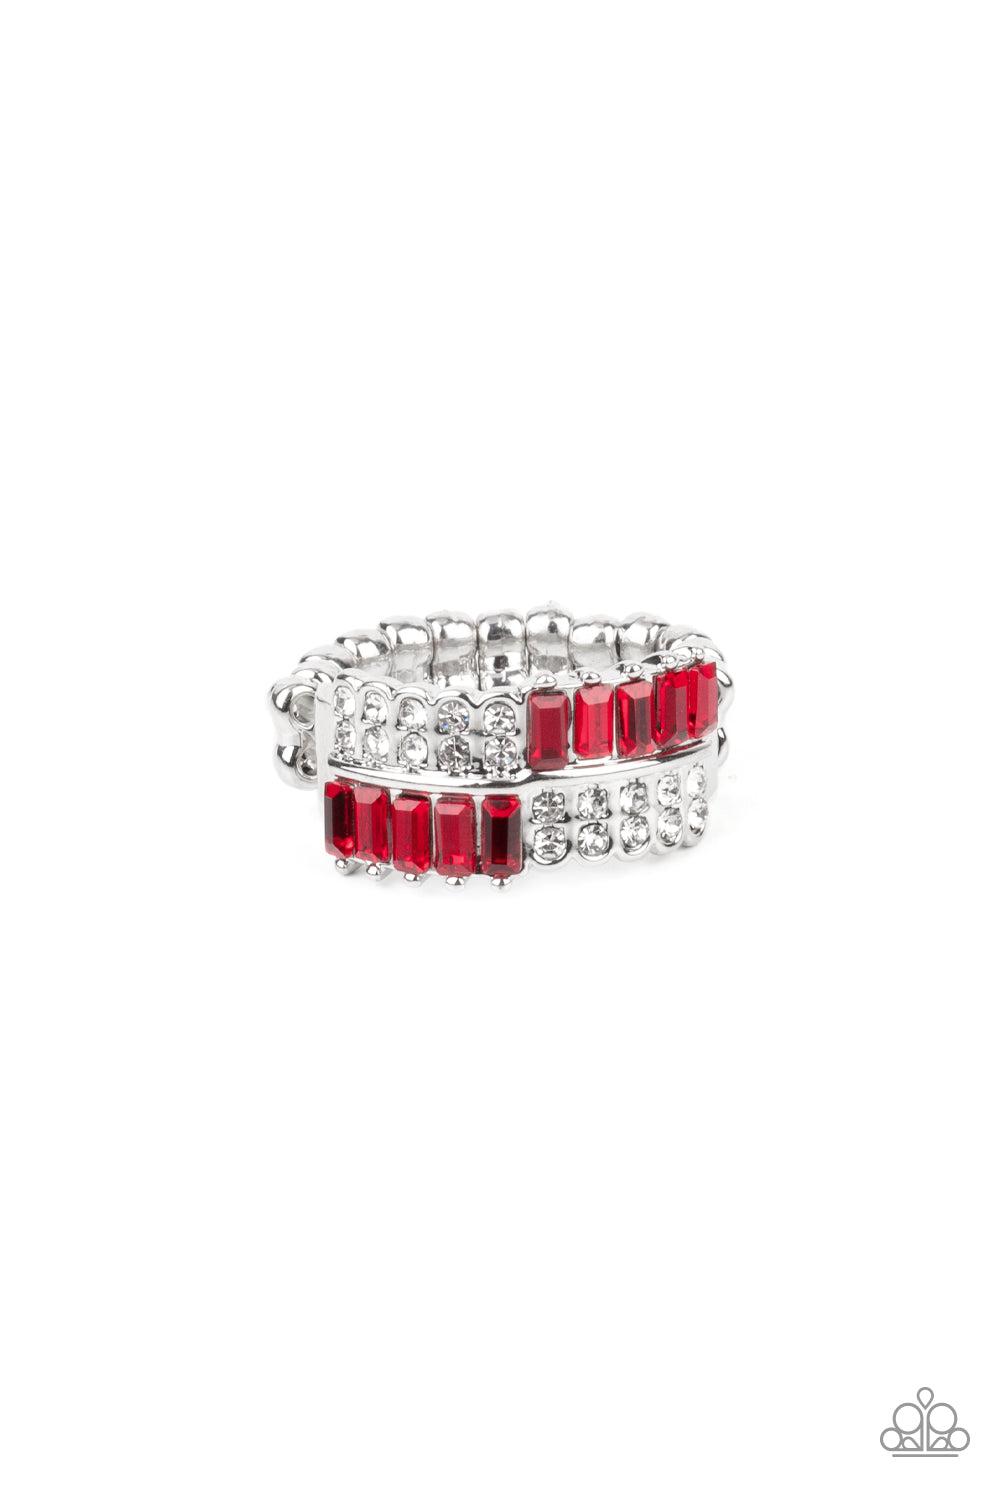 Put Them in Check Red & White Rhinestone Ring - Paparazzi Accessories- lightbox - CarasShop.com - $5 Jewelry by Cara Jewels